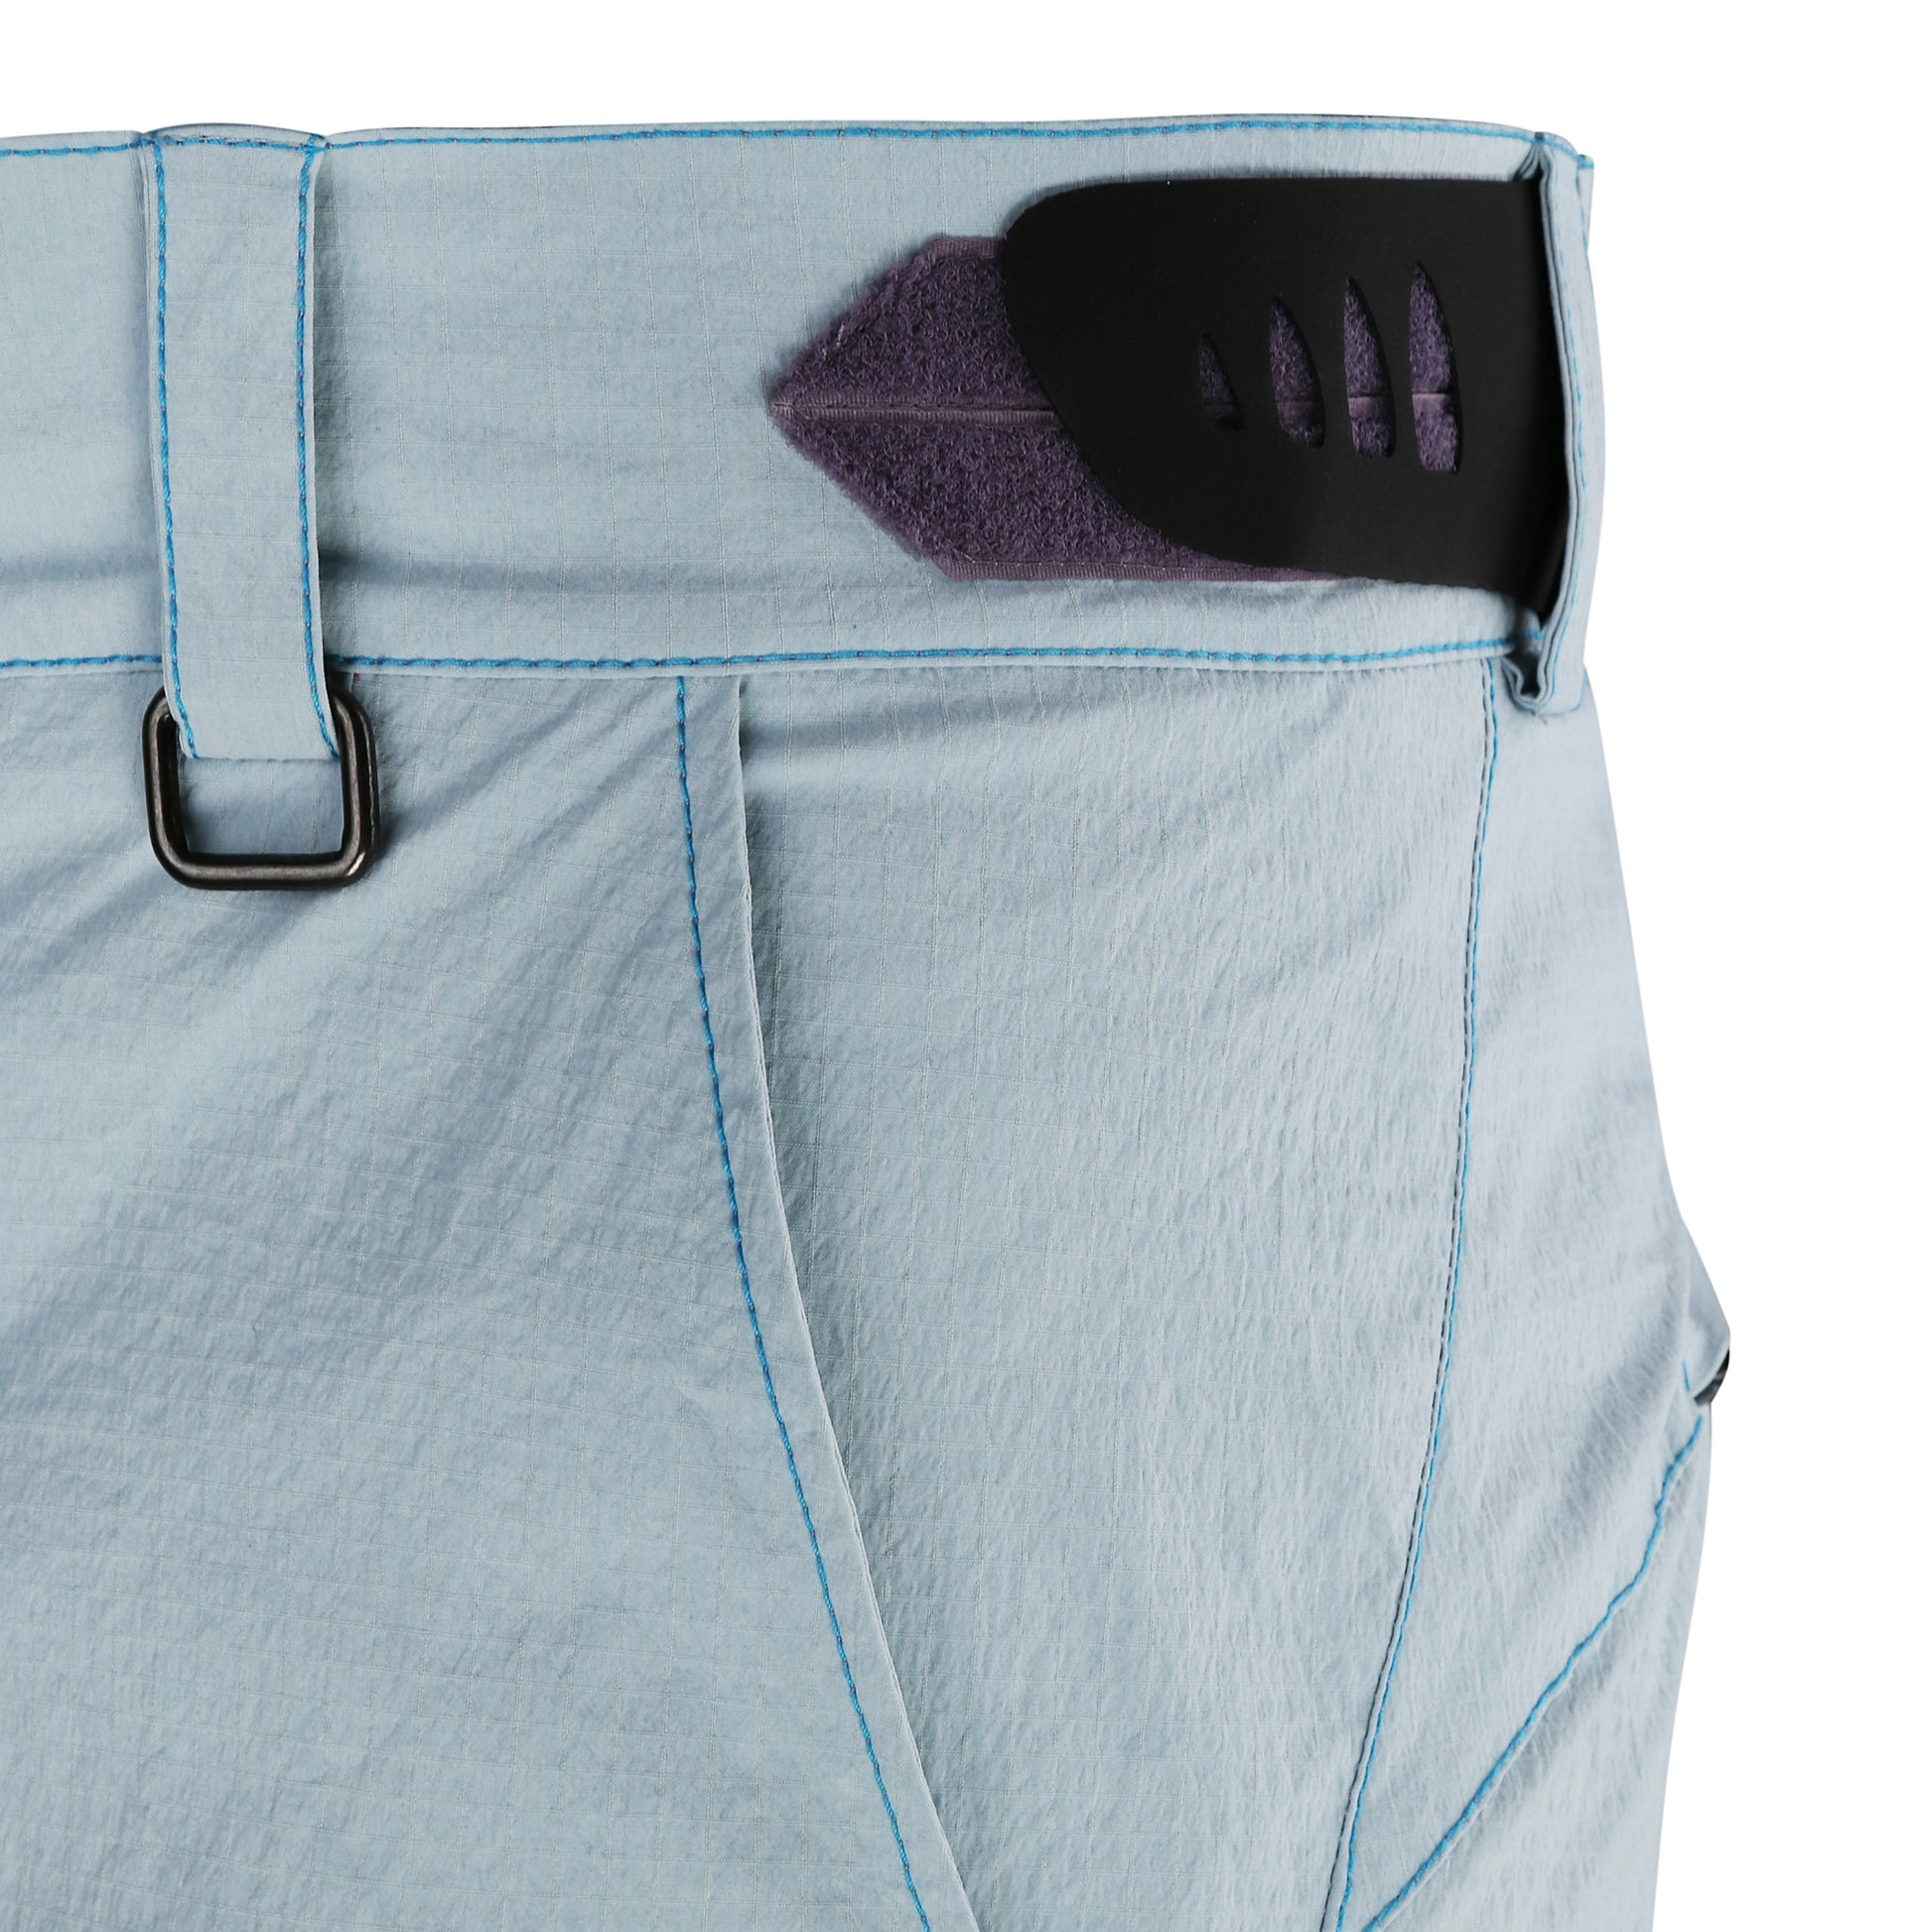 Waterproof casual shorts for men from REwind